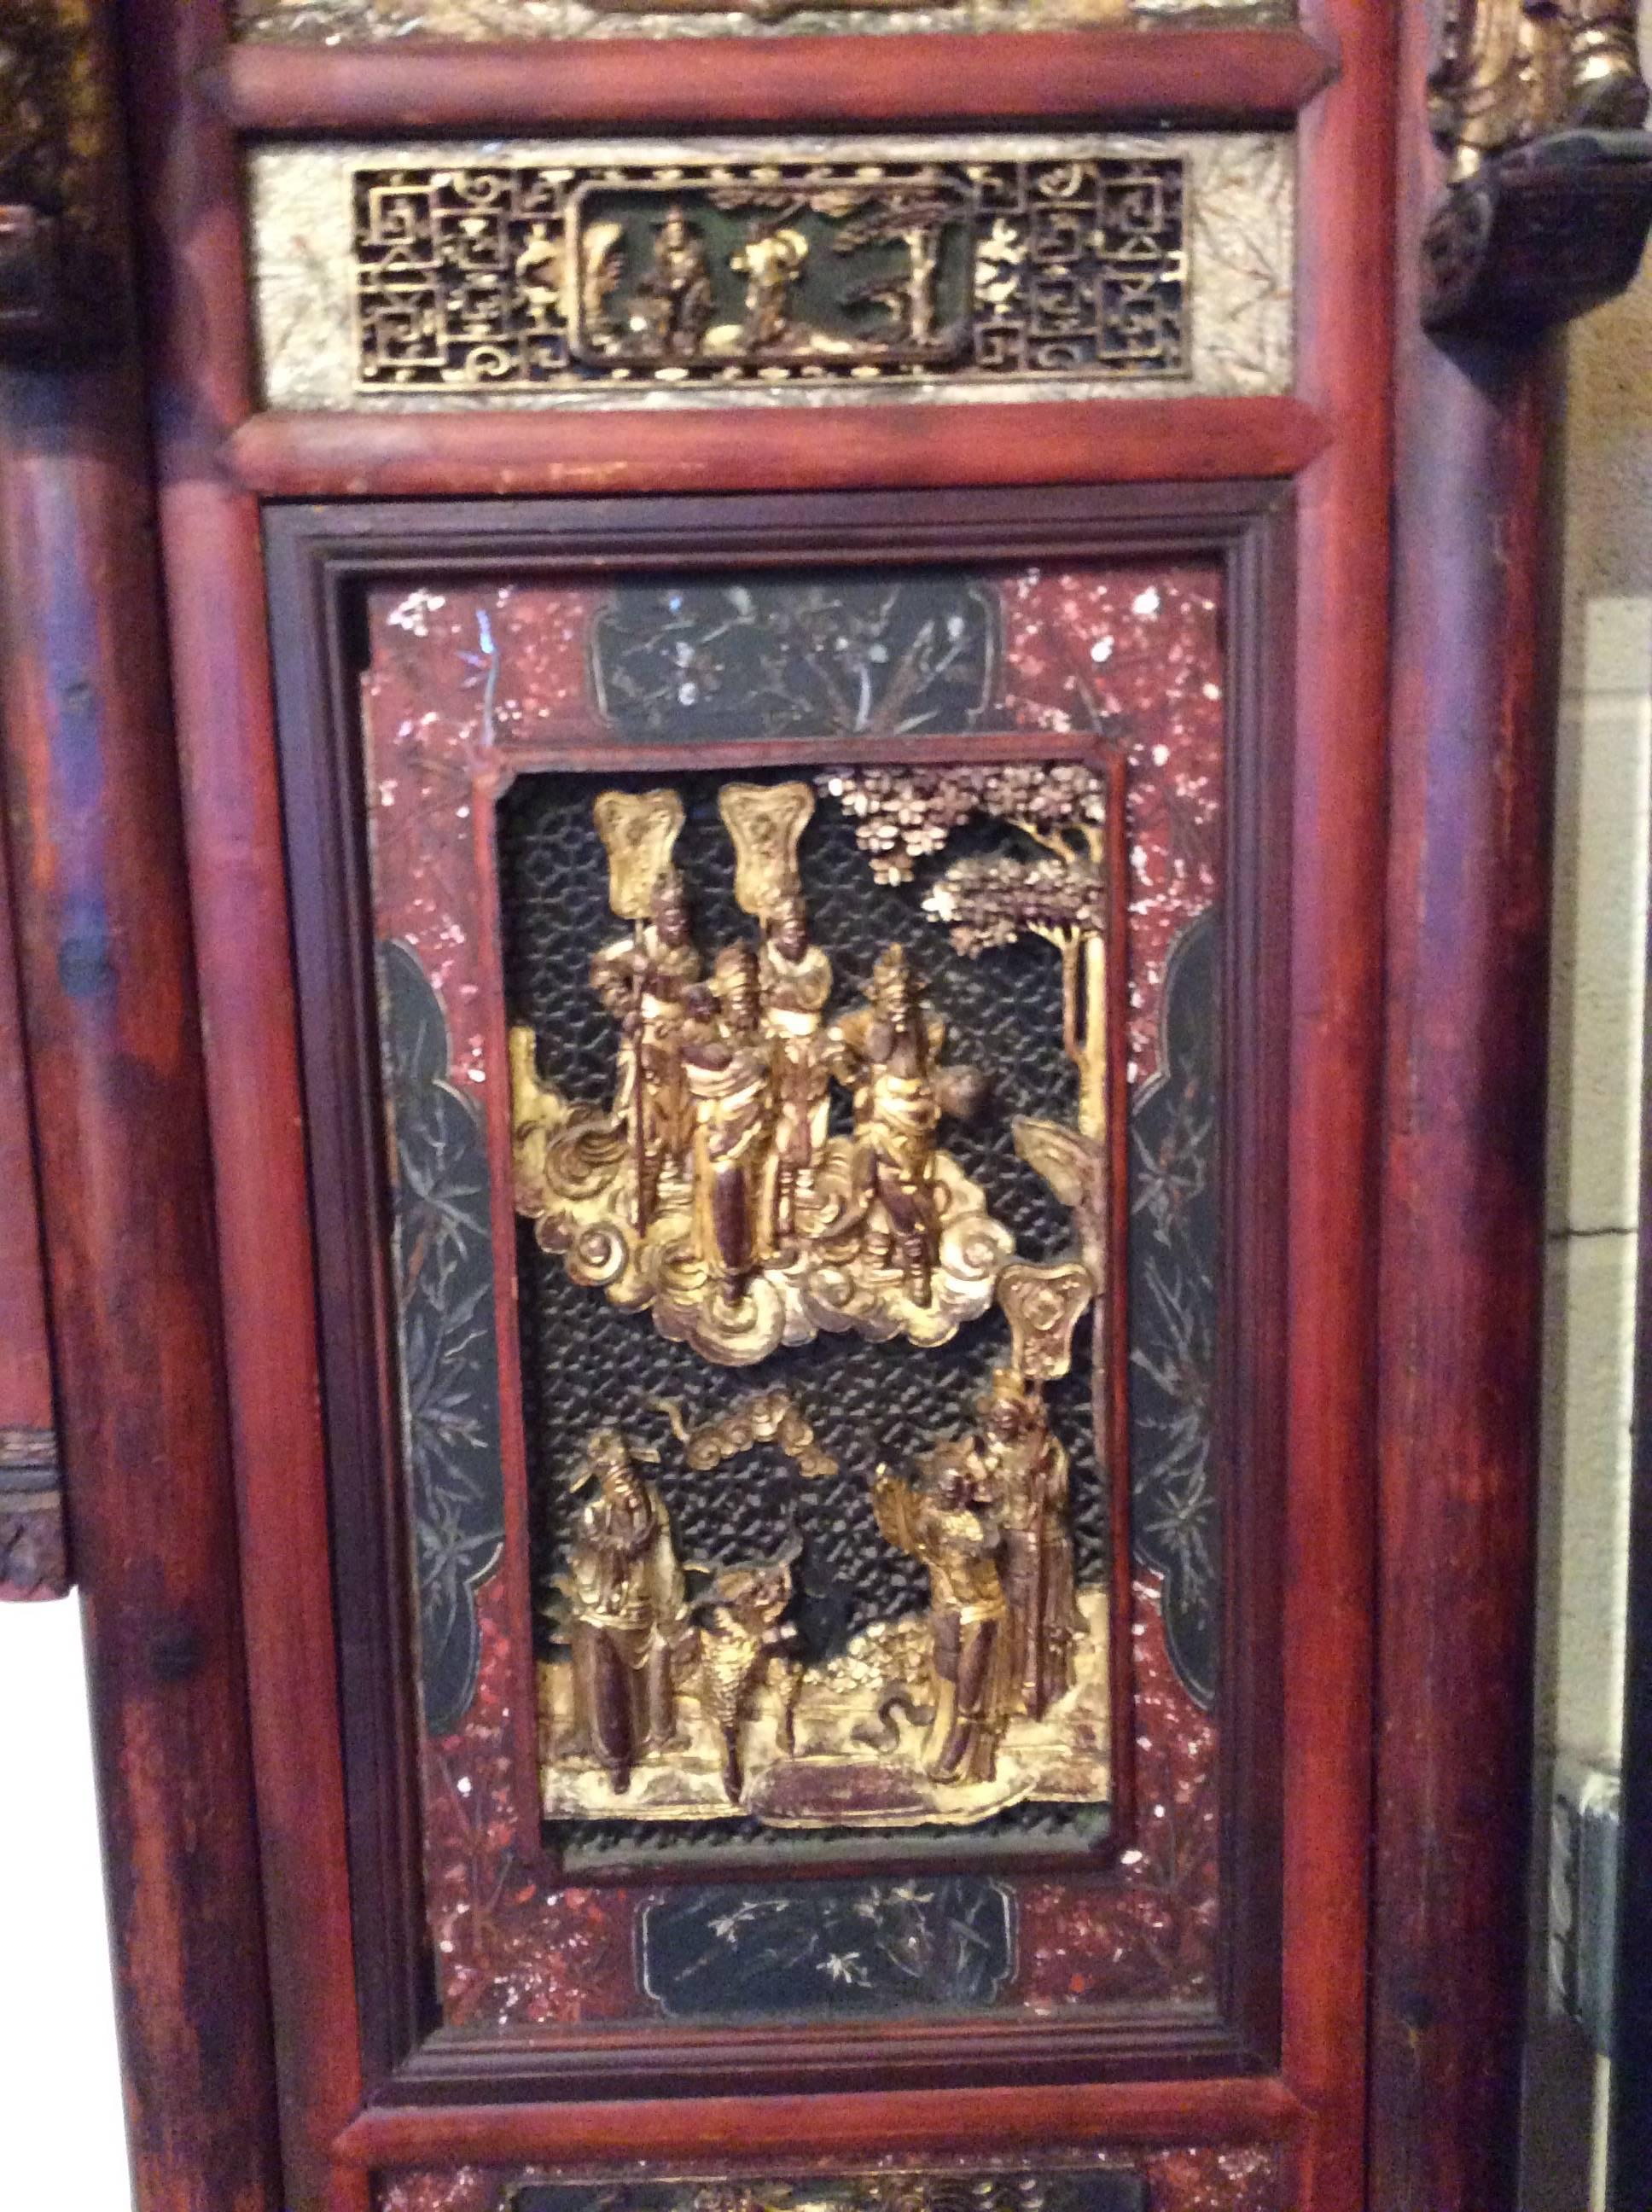 
Detailed pierced carving is present throughout this portion of a Chinese wedding bed. Open fretwork would have let light shine through highlighting the detailed carving.
Carved birds at the top of the piece have movable wings on wire that quiver